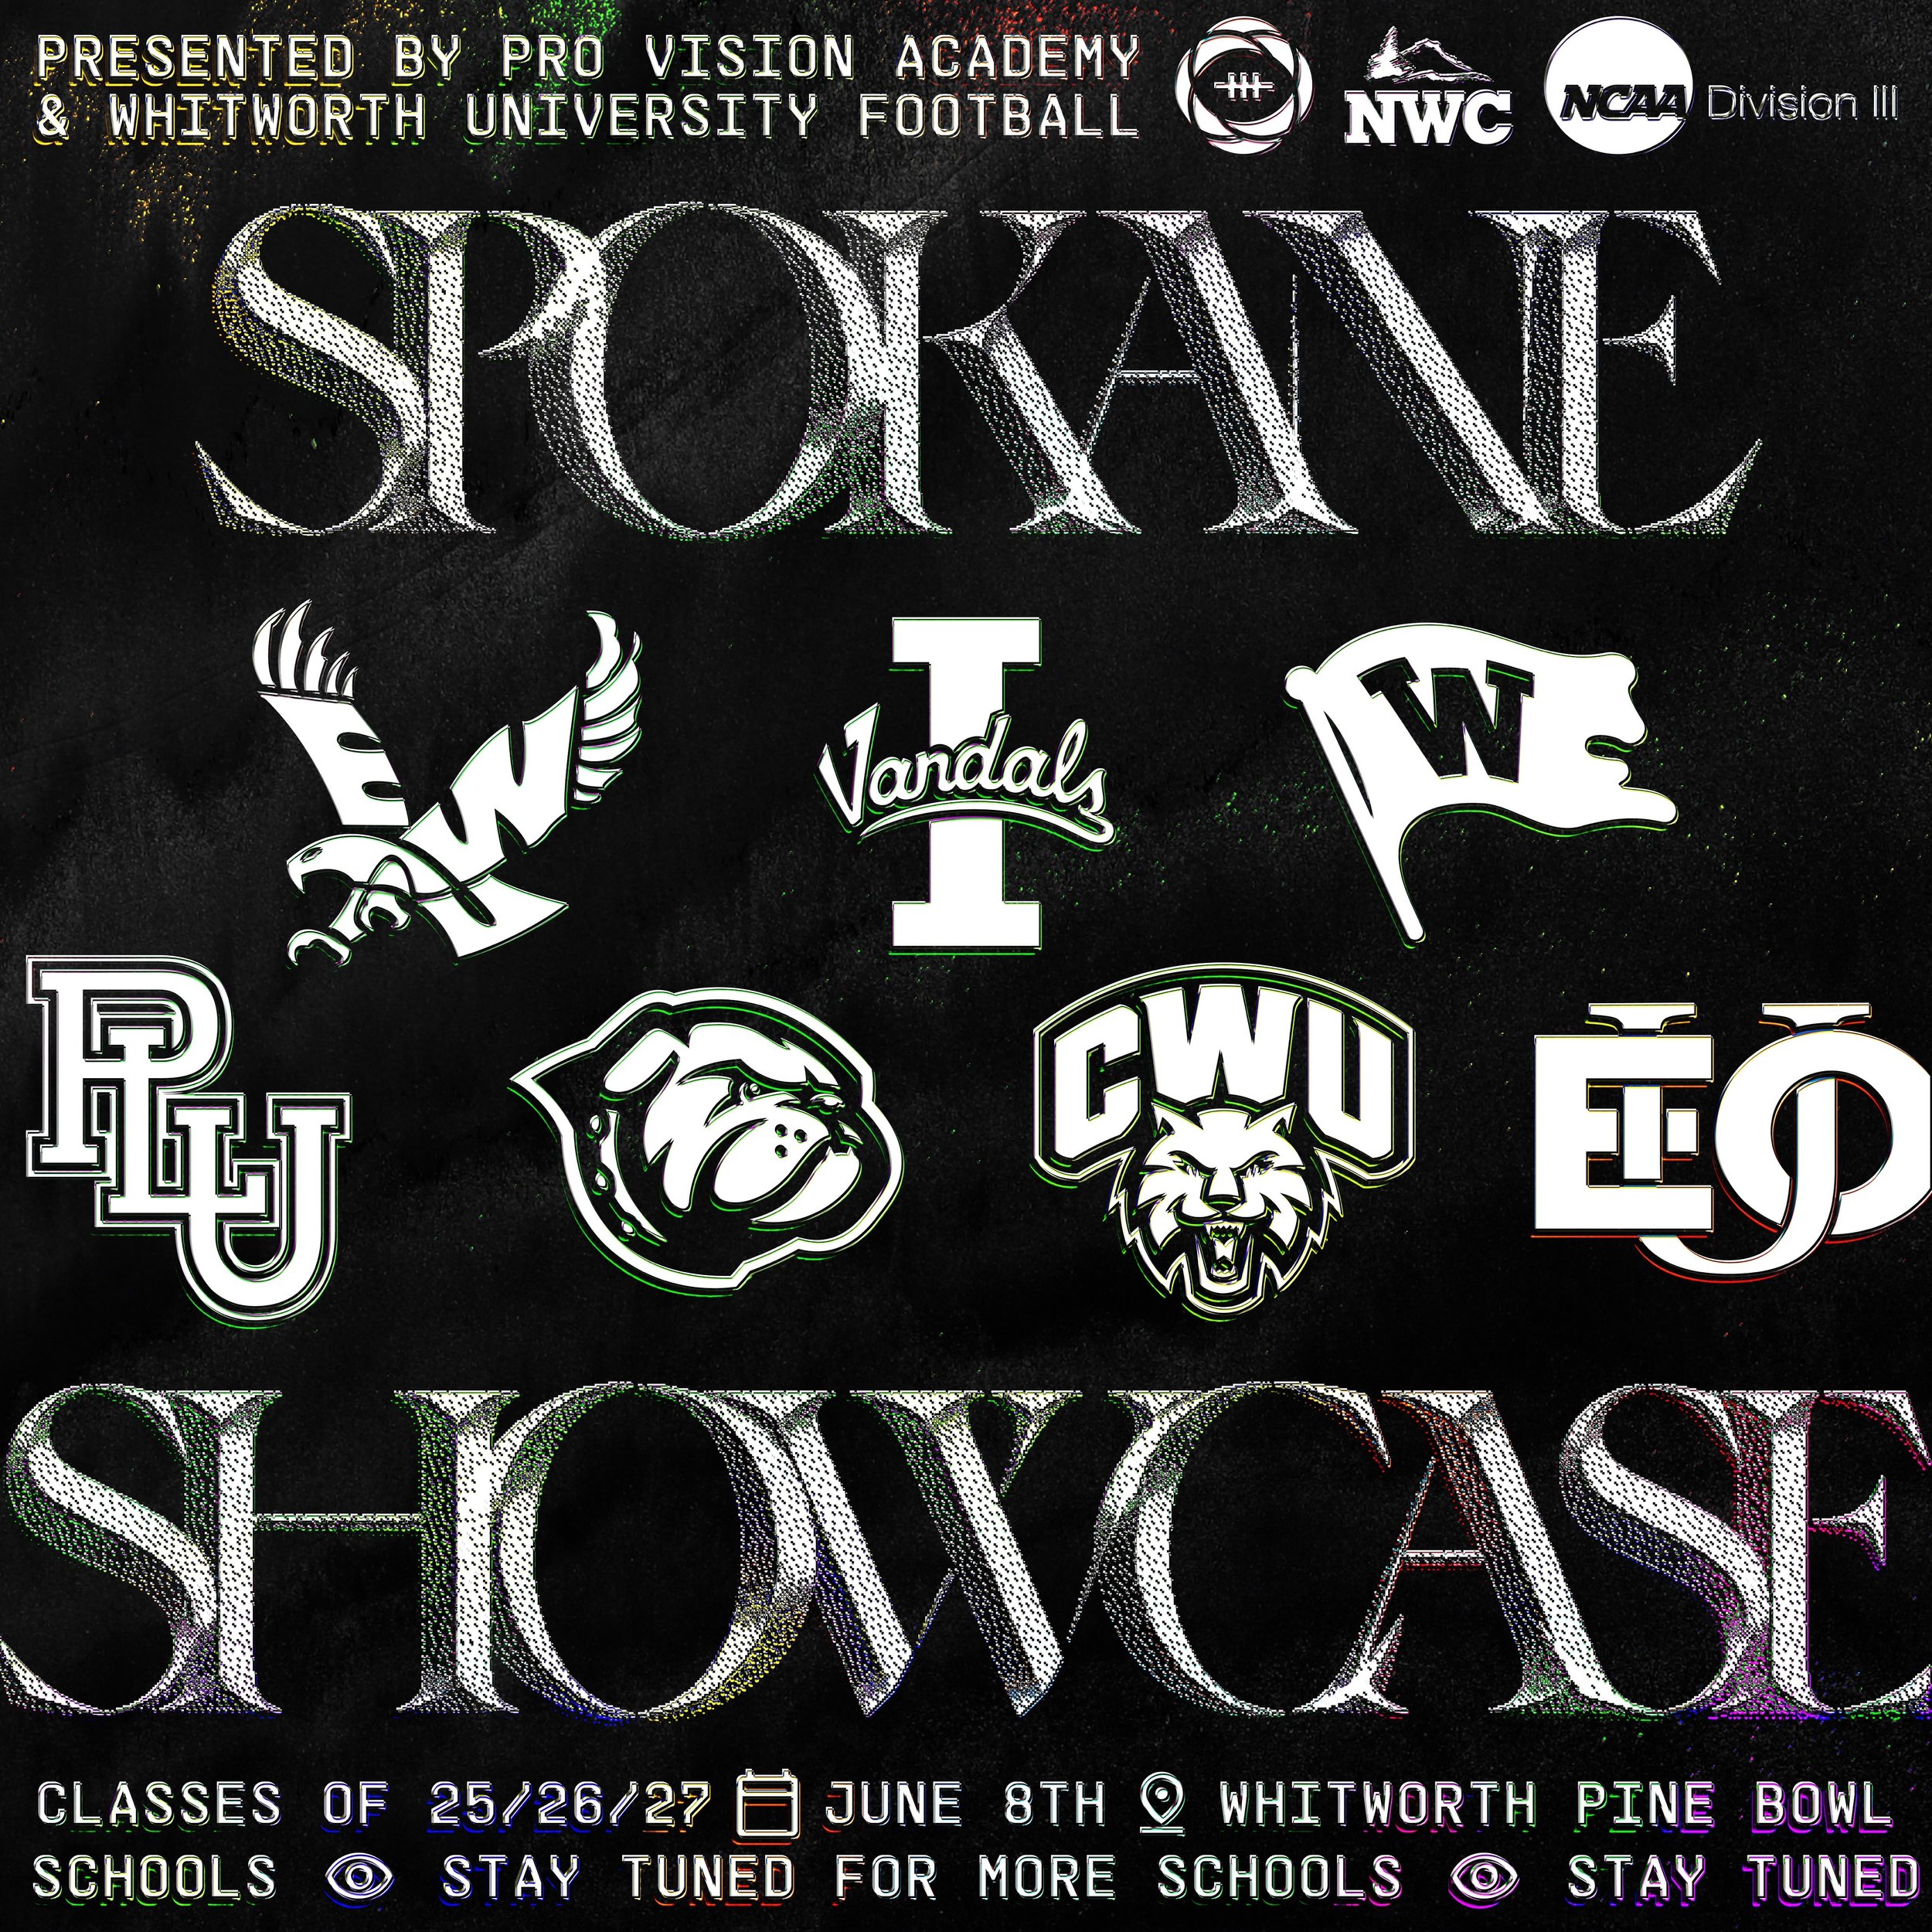 About a month away from the Spokane Showcase‼️Class of 25/26/27 here is your time to show your skills in front of the colleges in your region. Tons of reps, all eyes on you👀🏈